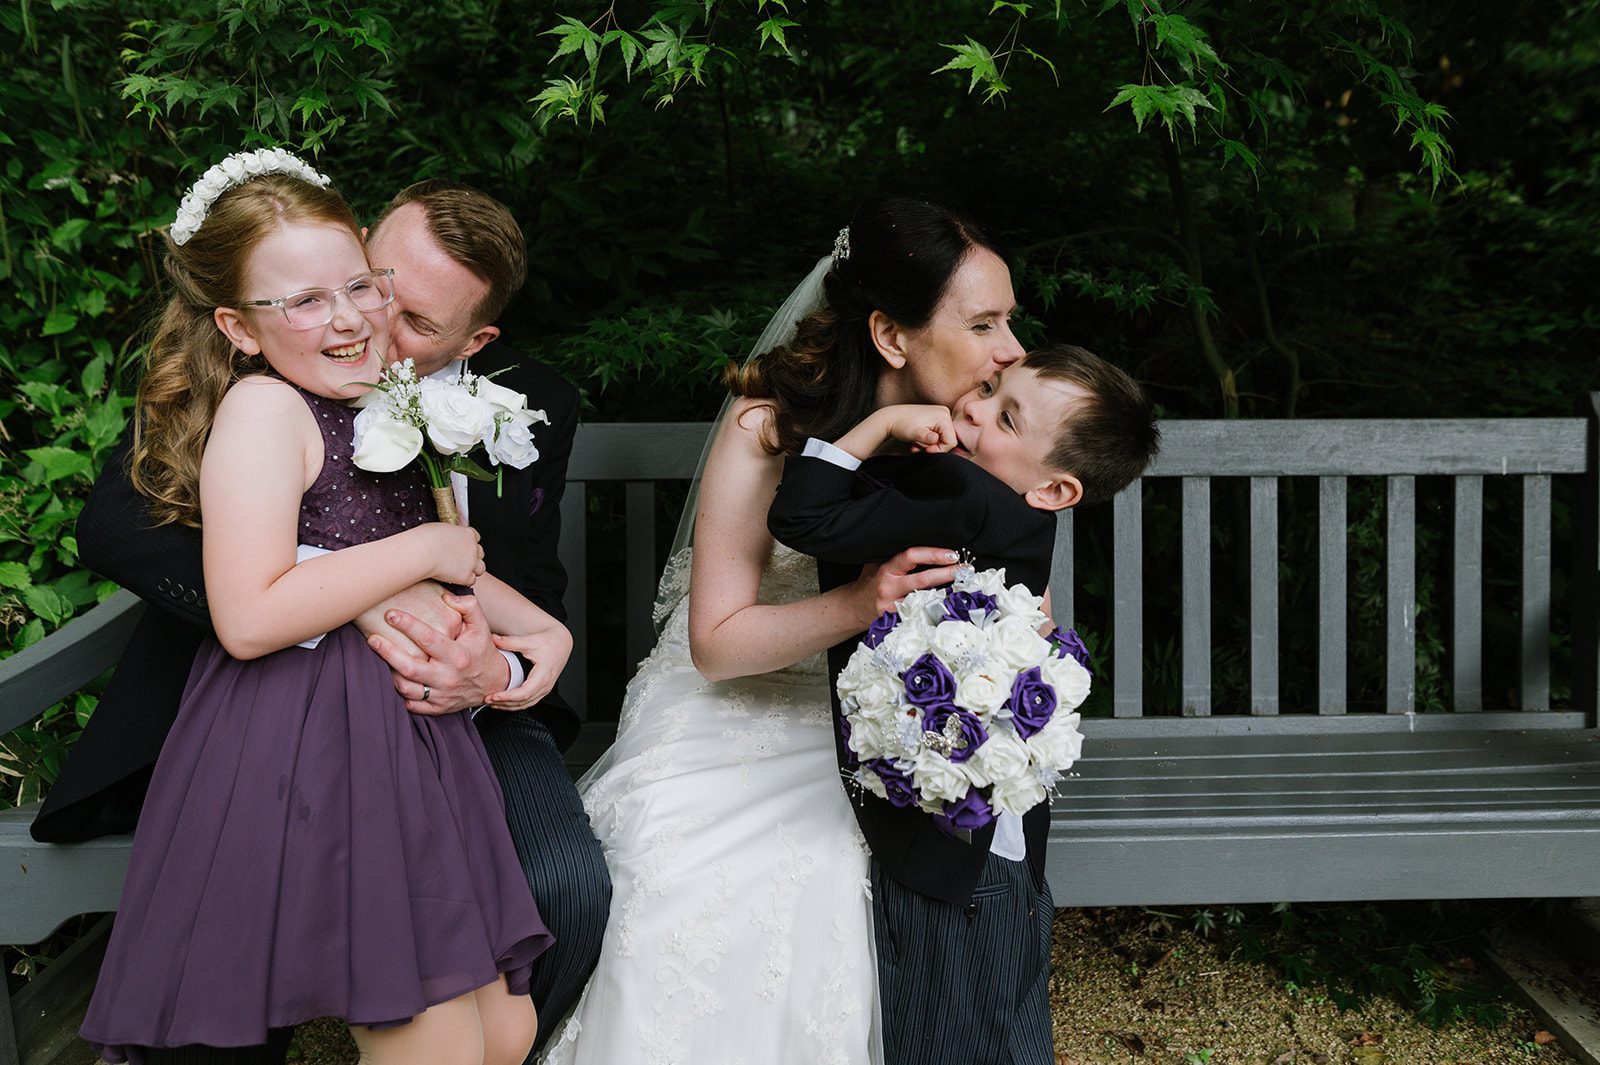 bride and groom with their young children sitting on a bench kissing the kids on the cheek